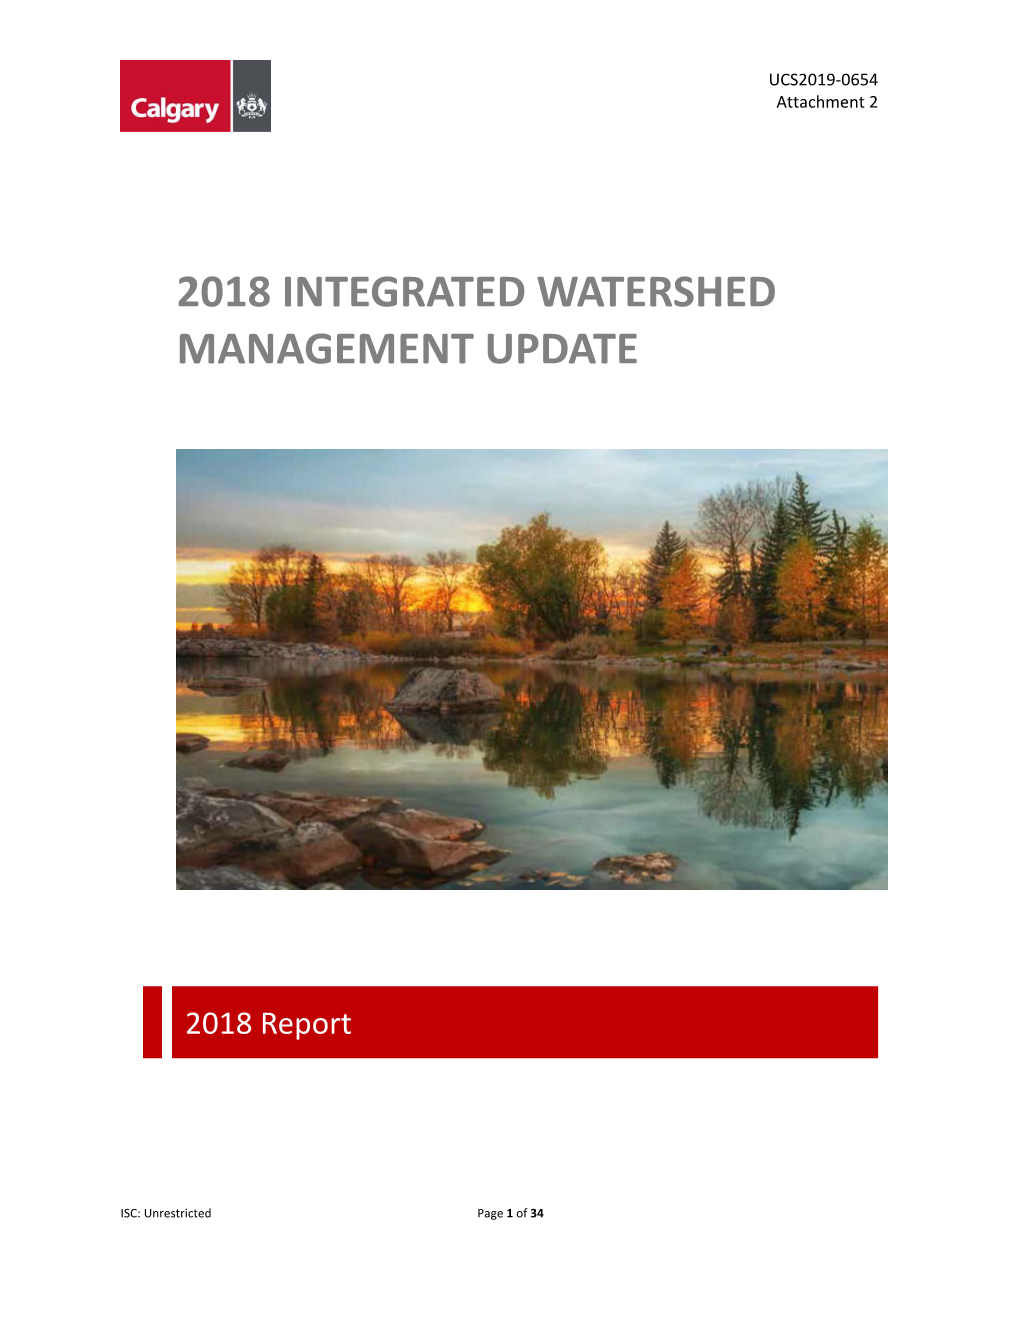 2018 Integrated Watershed Management Update.Pdf